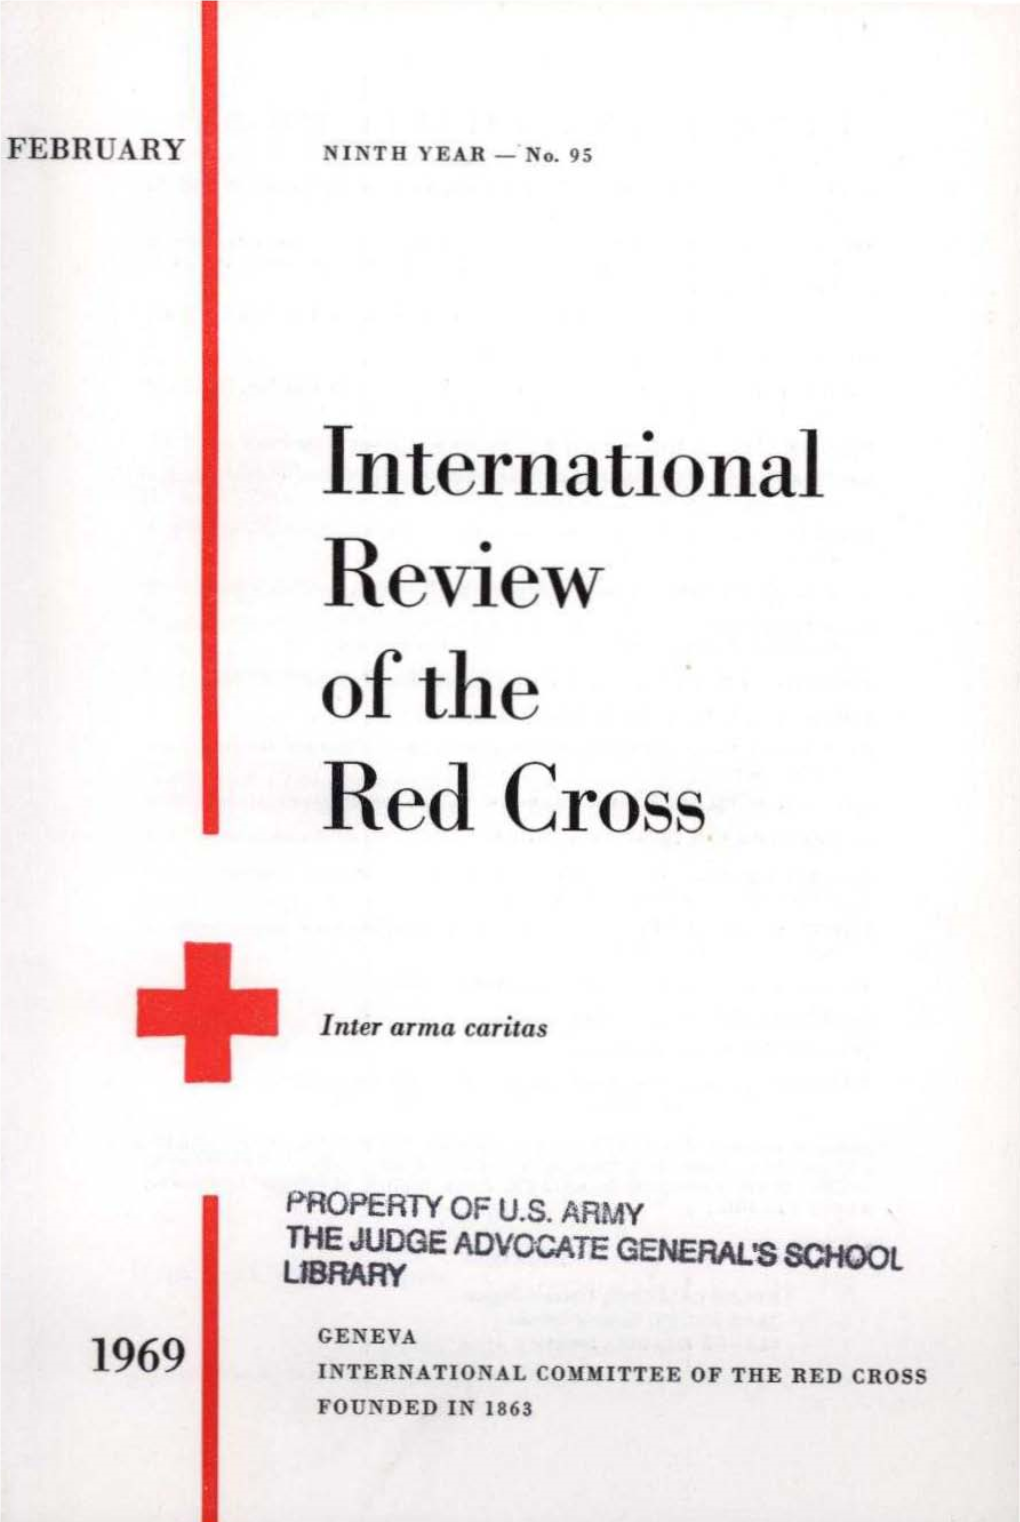 International Review of the Red Cross, February 1969, Ninth Year